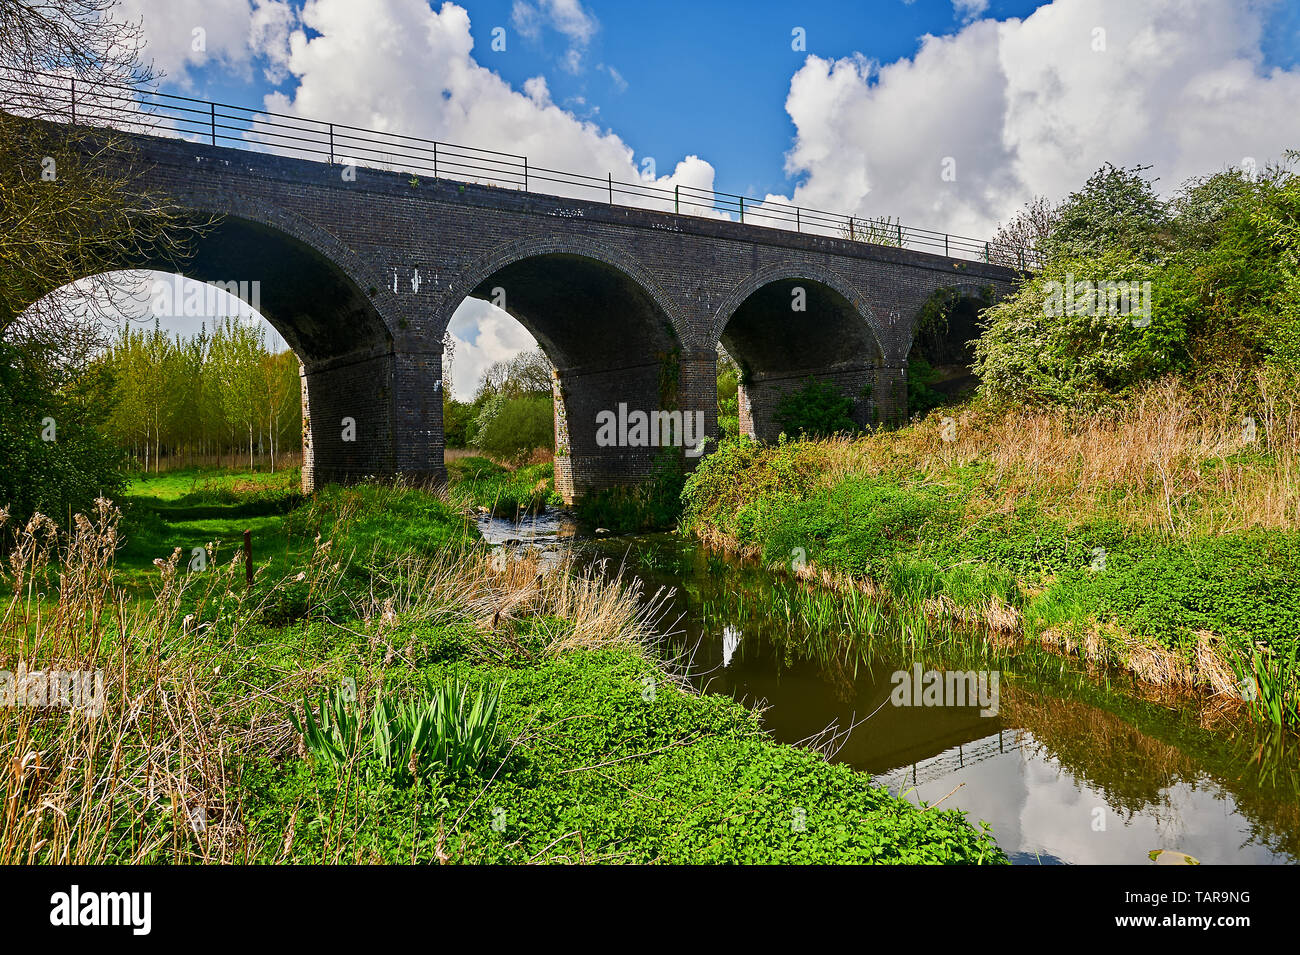 The River Itchen in Warwickshire with a brick arched viaduct from the former railway line link Stock Photo